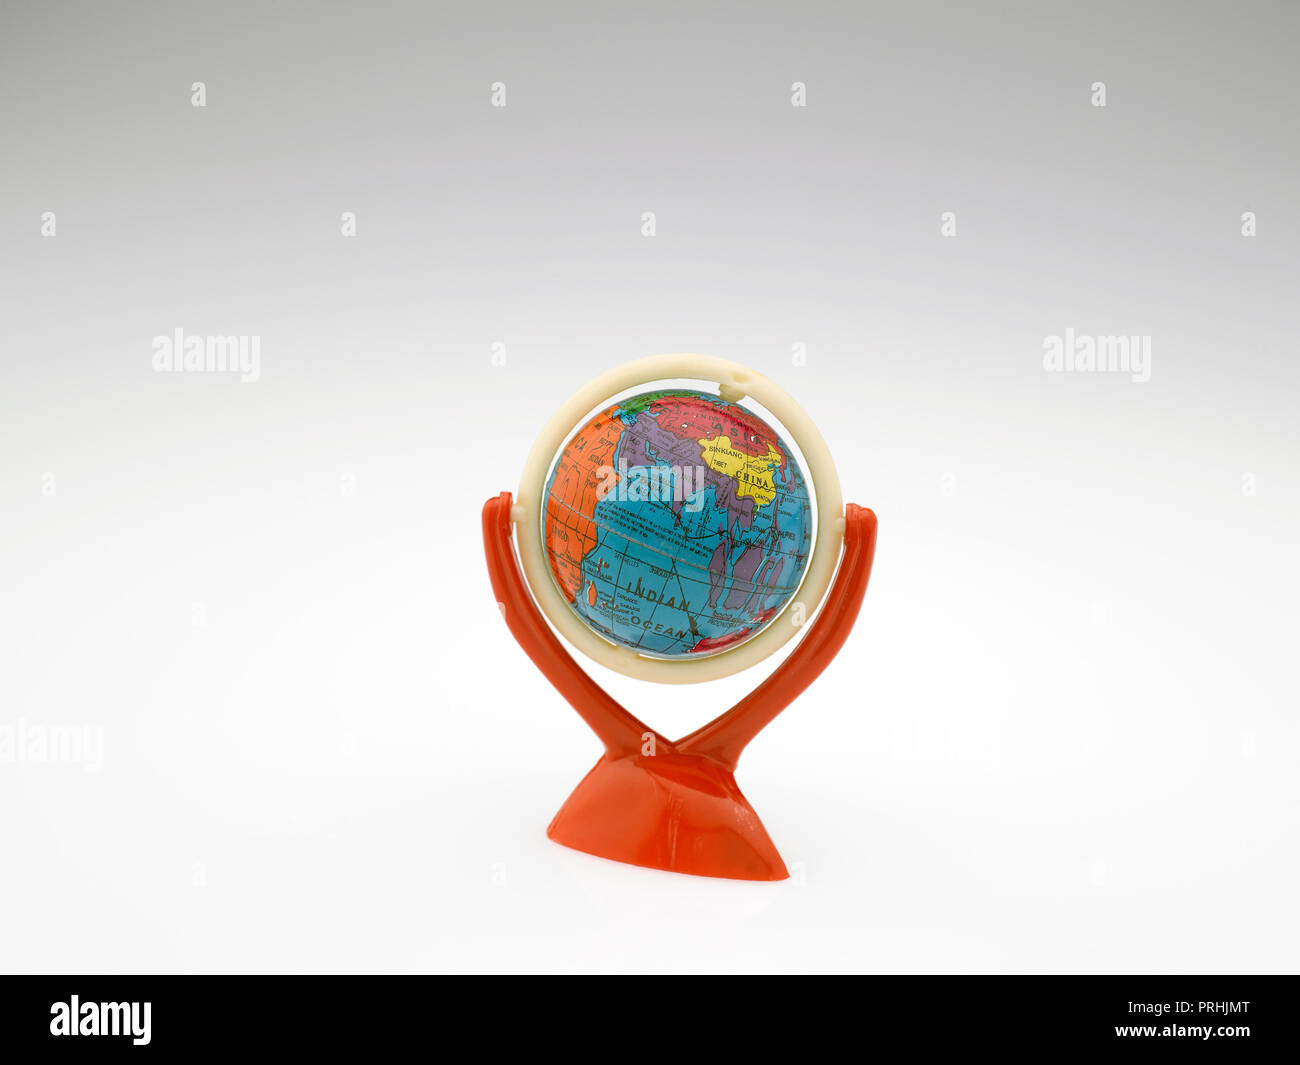 STILL LIFE OF A GLOBE DEPICTING THE EARTH ON A WHITE BACKGROUND Stock Photo